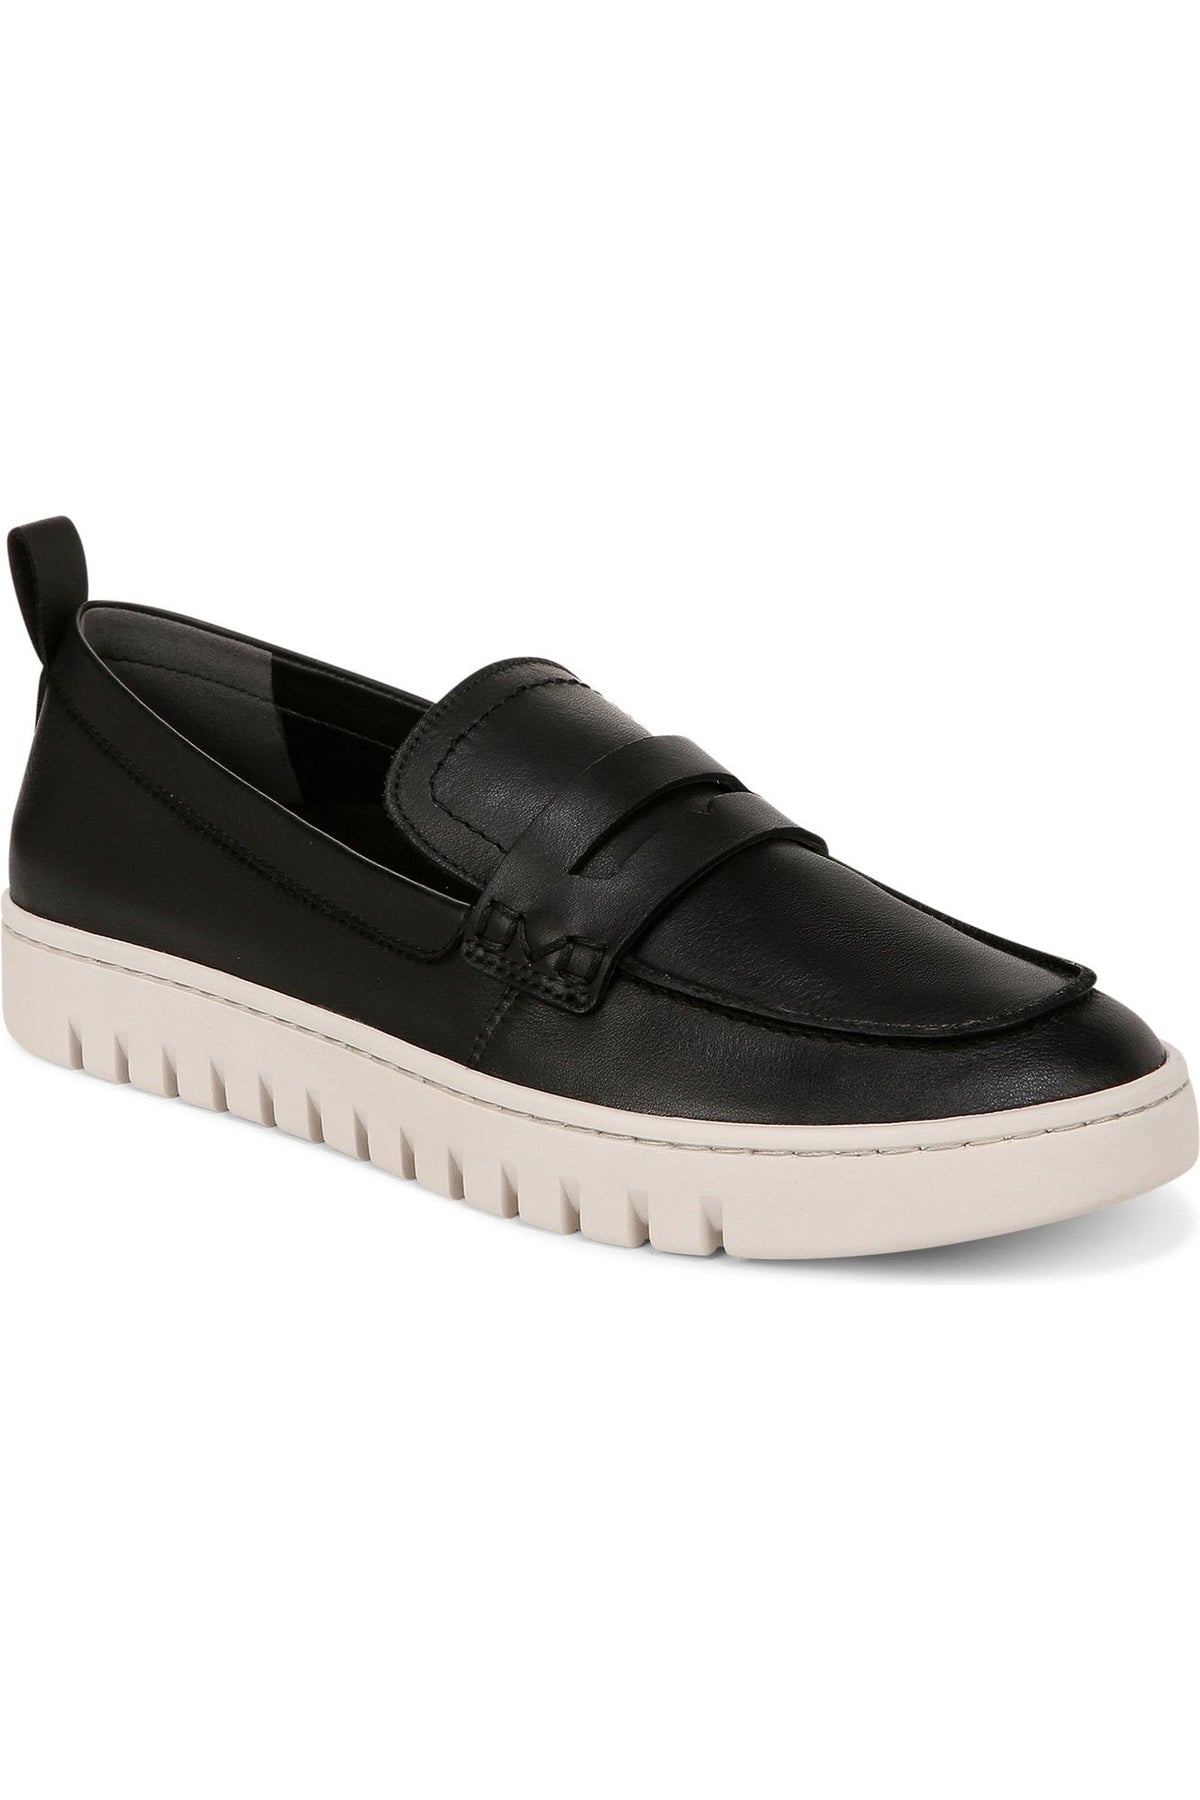 Vionic Leather Loafer - Style UPTOWN, side